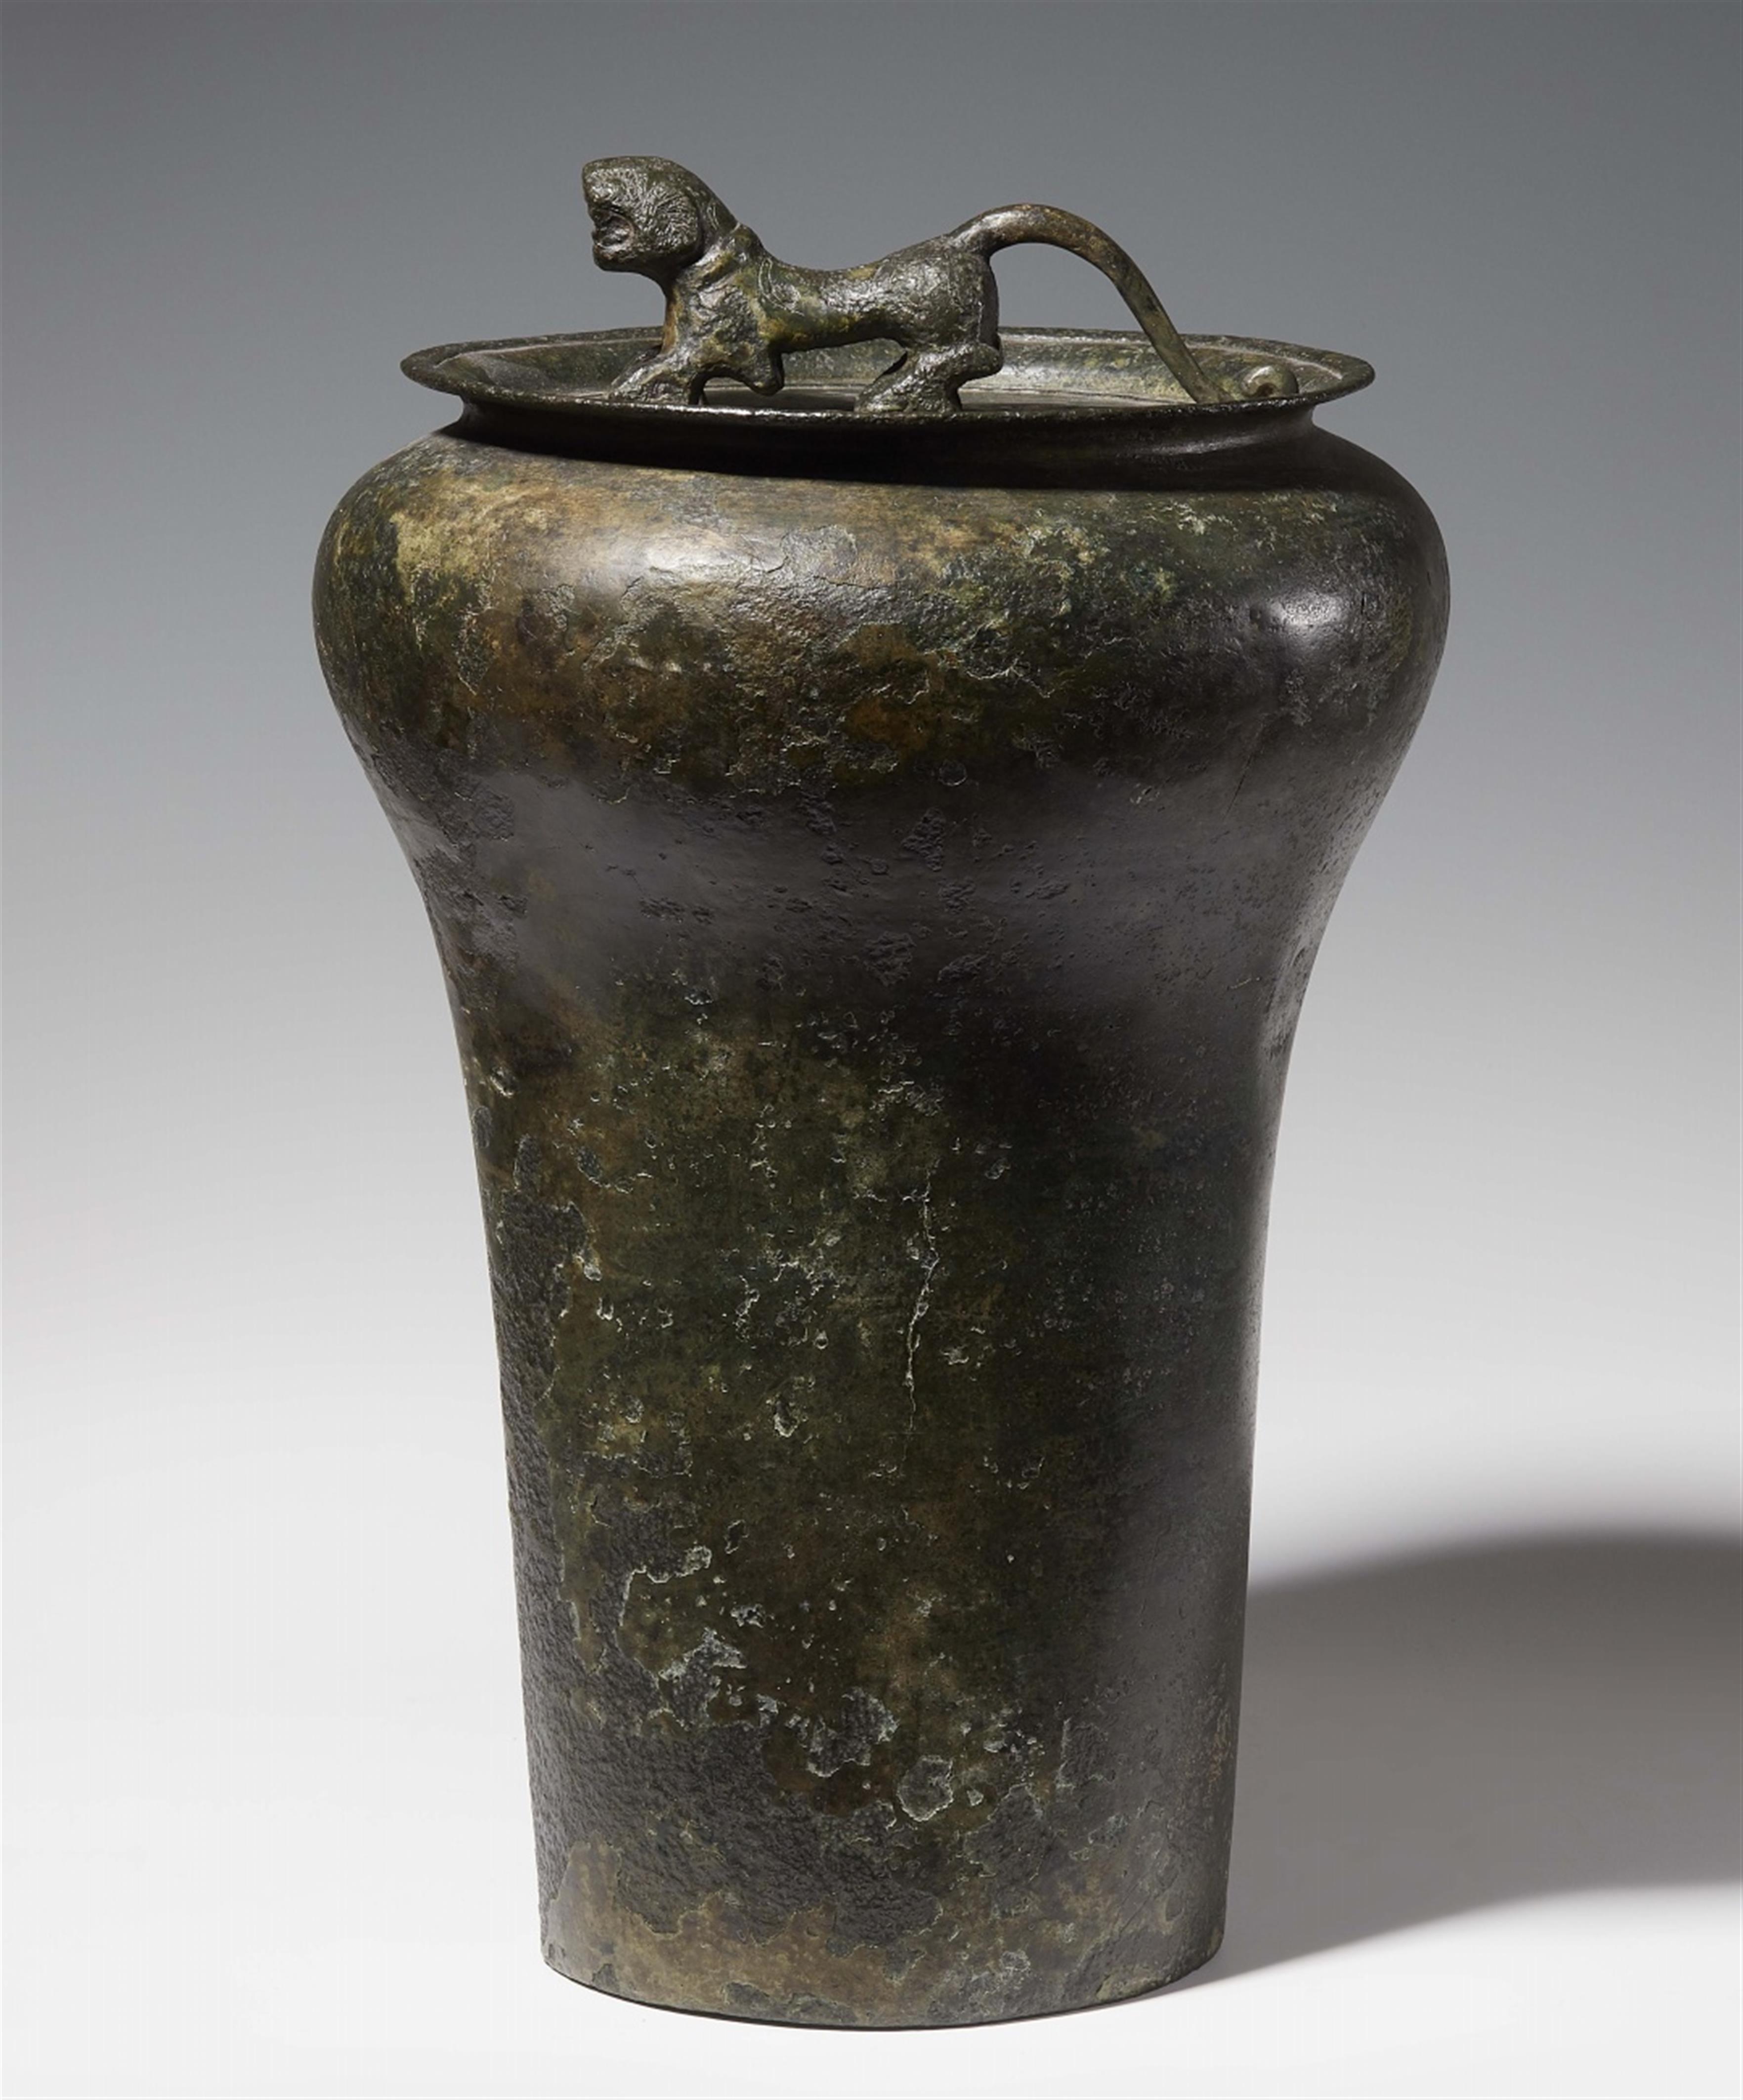 A large bronze military drum/bell. South-central/South-west China. Late Eastern Zhou/early Western Han dynasty, 4th/3rd century BC - image-1